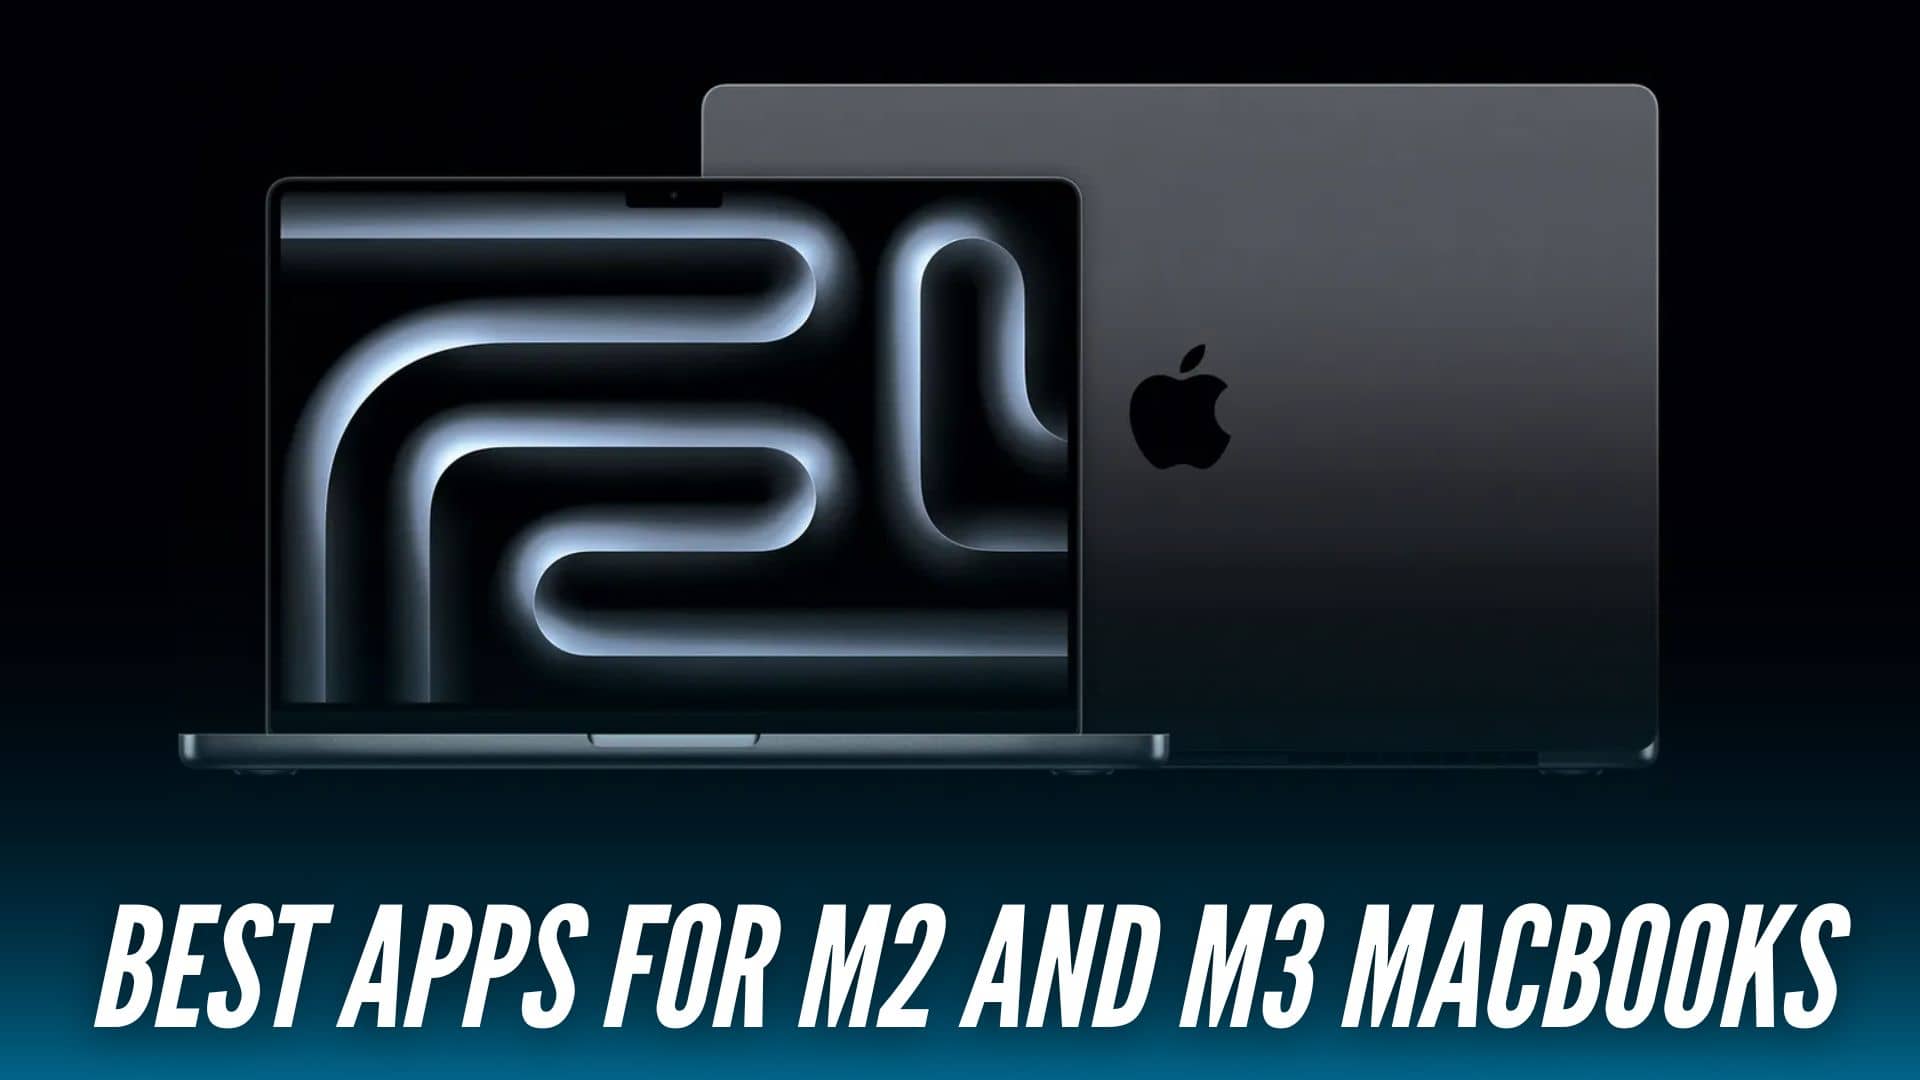 Top 28 Apps for M2 and M3 MacBooks that you should use